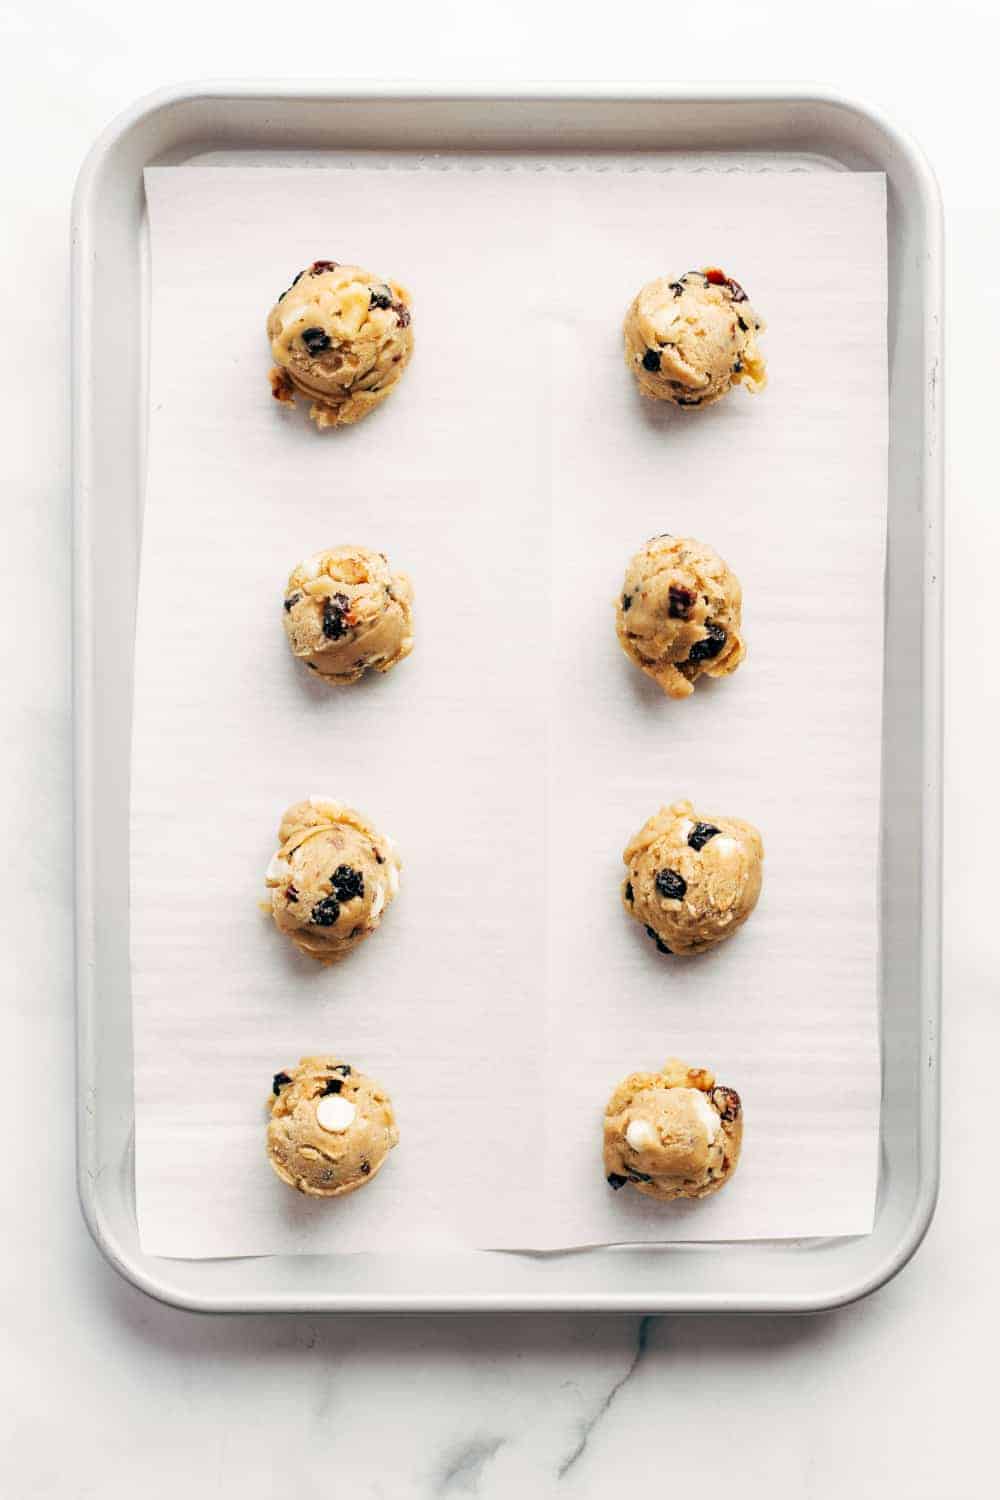 Granola Cookies are perfectly chewy, full of granola and dried fruit.